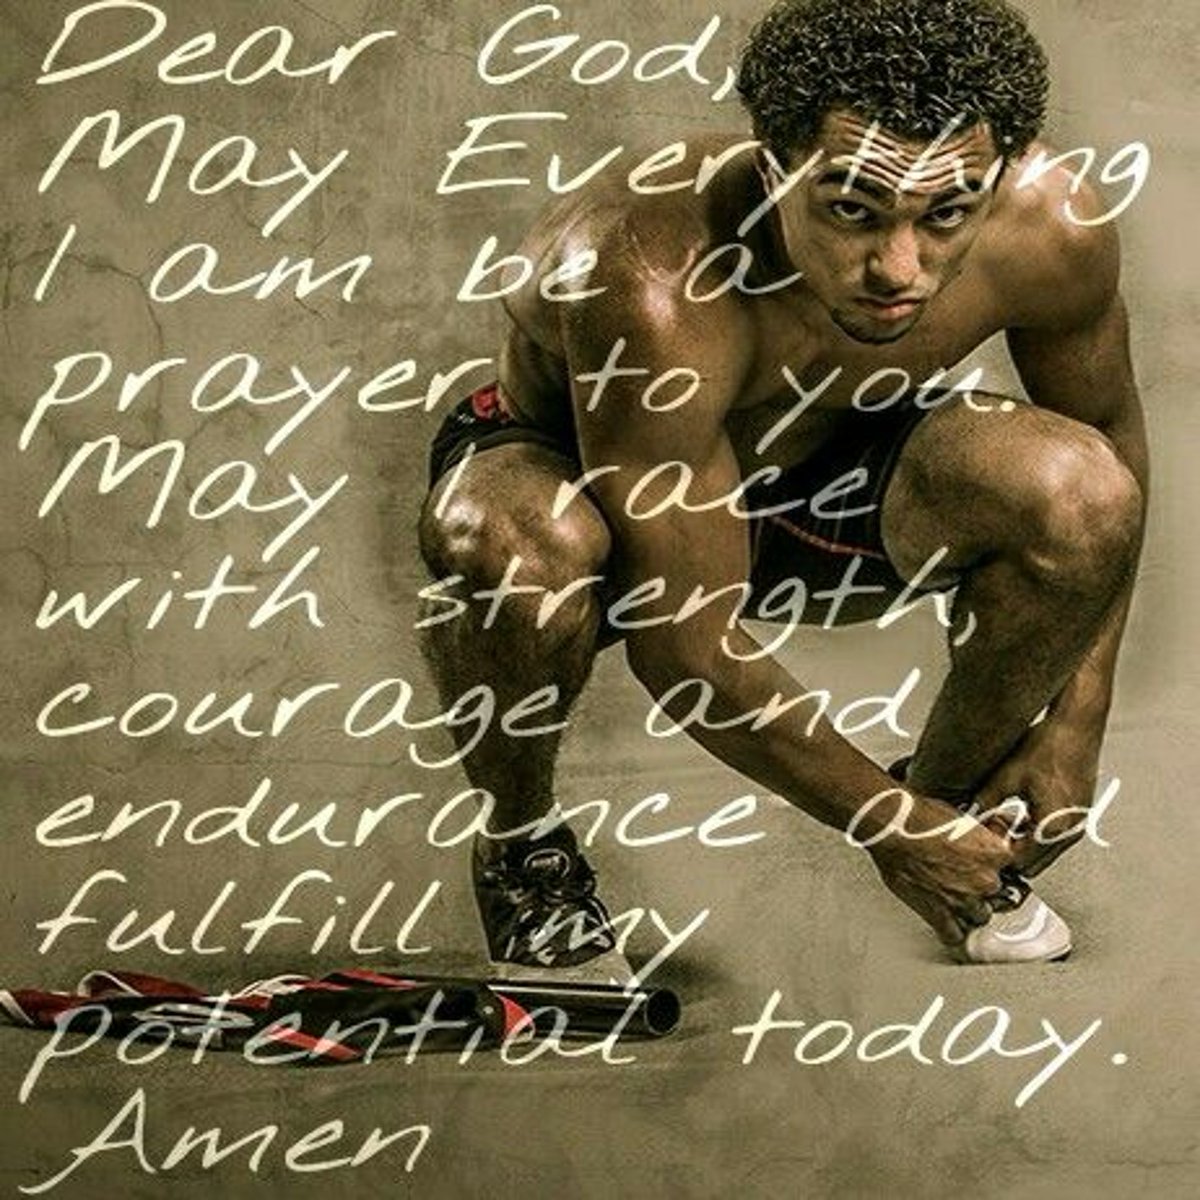 'Pro Athletes, We Pray for You' [zurl.co/UhiV] Your battles are often hidden from others, but God knows & He cares! #KevinDurant #ShaquilleONeal  #MichaelJordan #CharlesBarkley #StephCurry #TomBrady #LebronJames  #CristianoRonaldo #CaneloAlvarez #GiannisAntetokounmpo